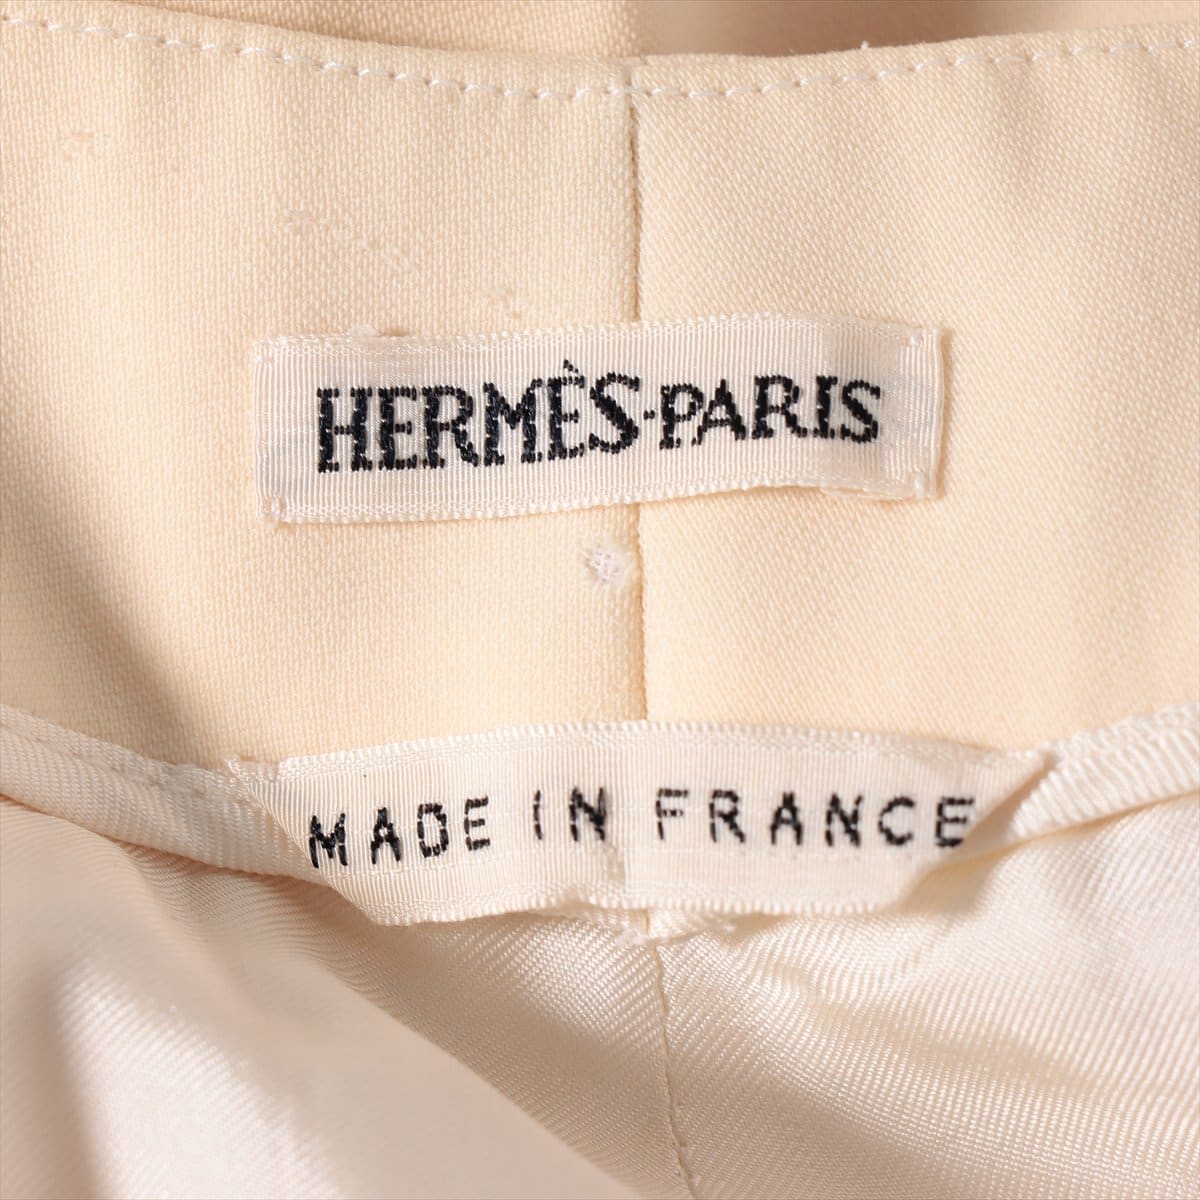 Hermès Margiela Wool Pants 34 Ladies' Ivory  There is a hole under the tag.